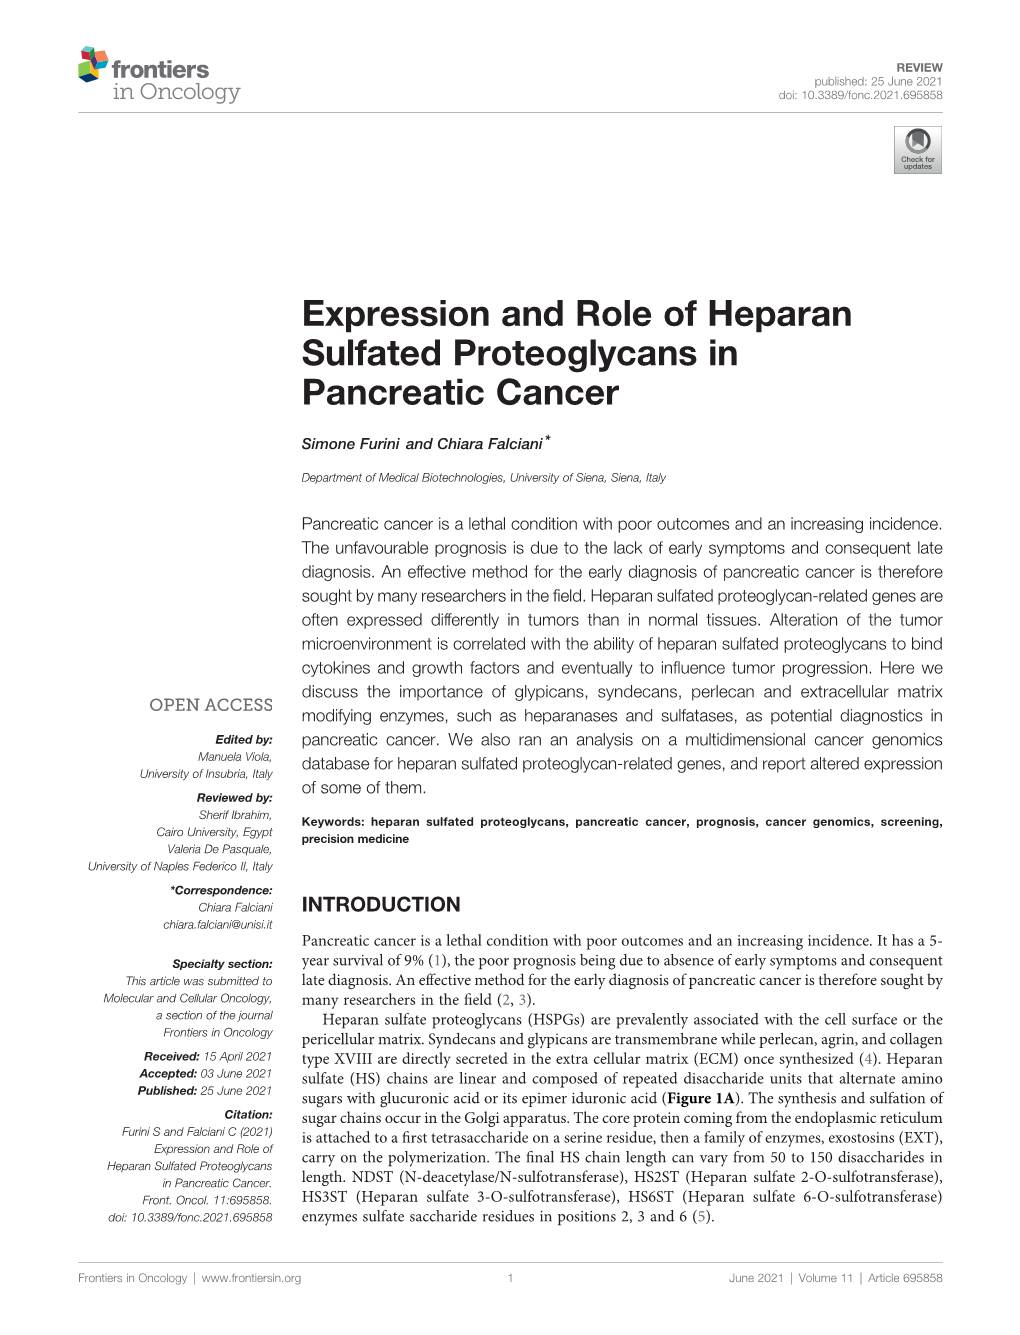 Expression and Role of Heparan Sulfated Proteoglycans in Pancreatic Cancer